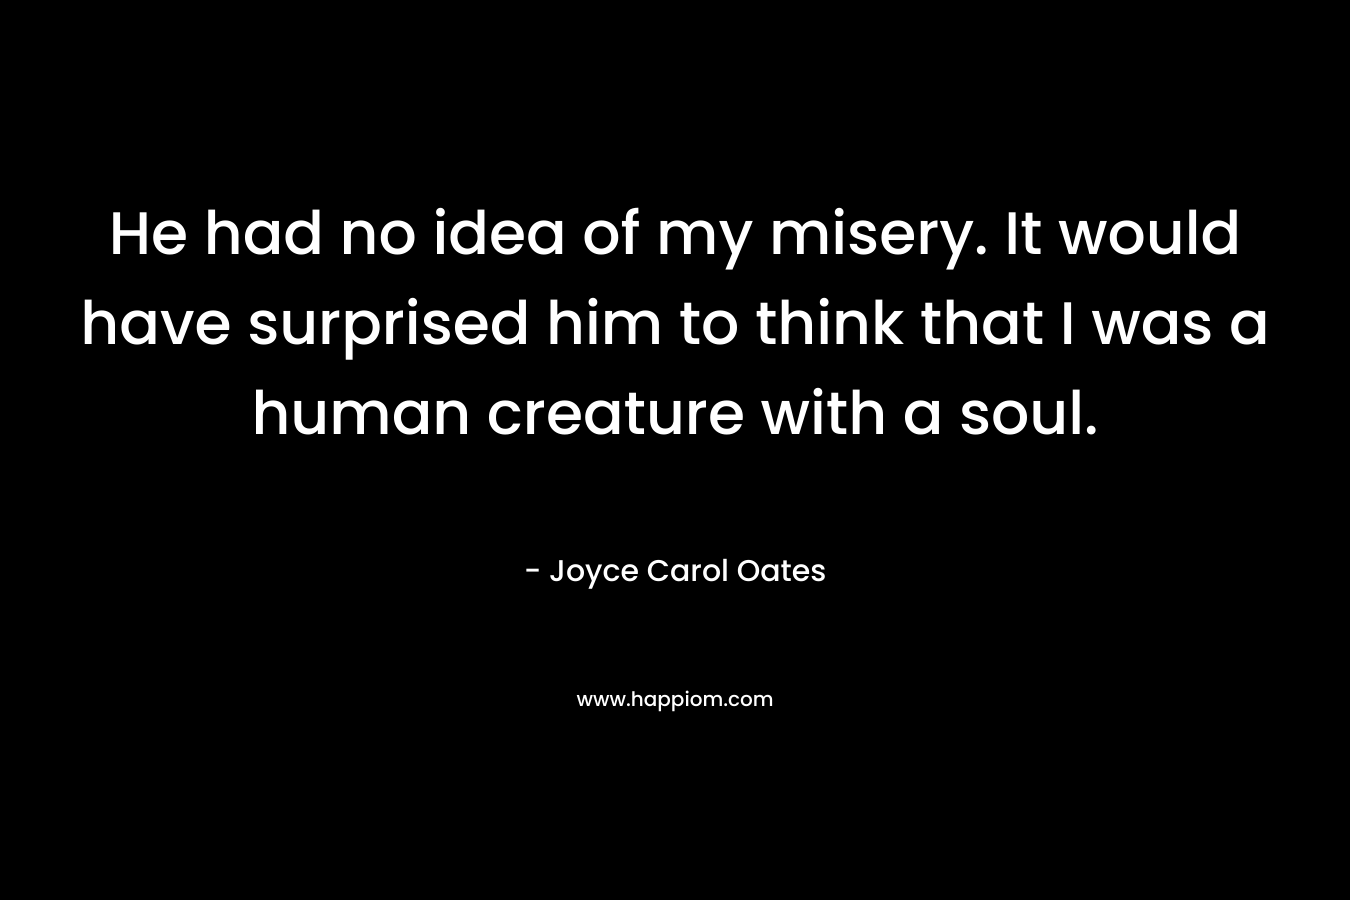 He had no idea of my misery. It would have surprised him to think that I was a human creature with a soul. – Joyce Carol Oates